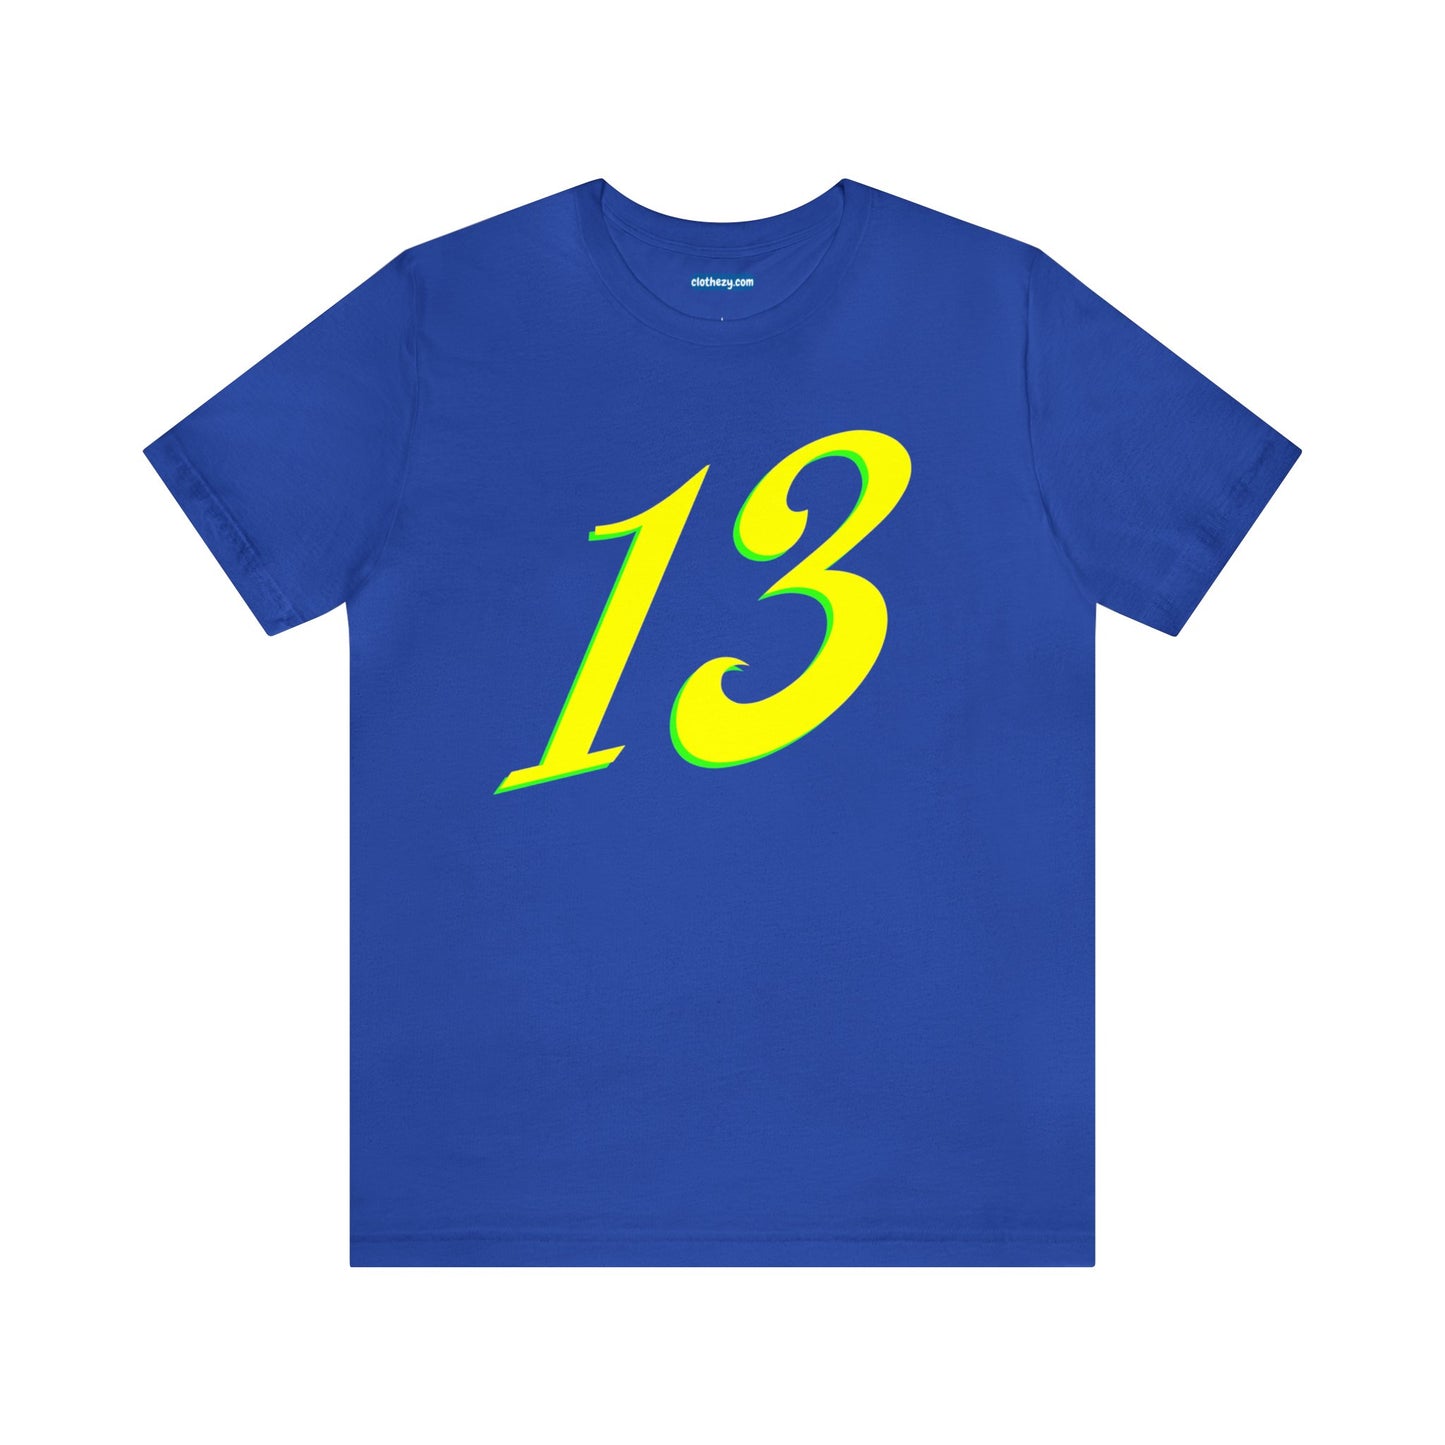 Number 13 Design - Soft Cotton Tee for birthdays and celebrations, Gift for friends and family, Multiple Options by clothezy.com in Royal Blue Size Small - Buy Now